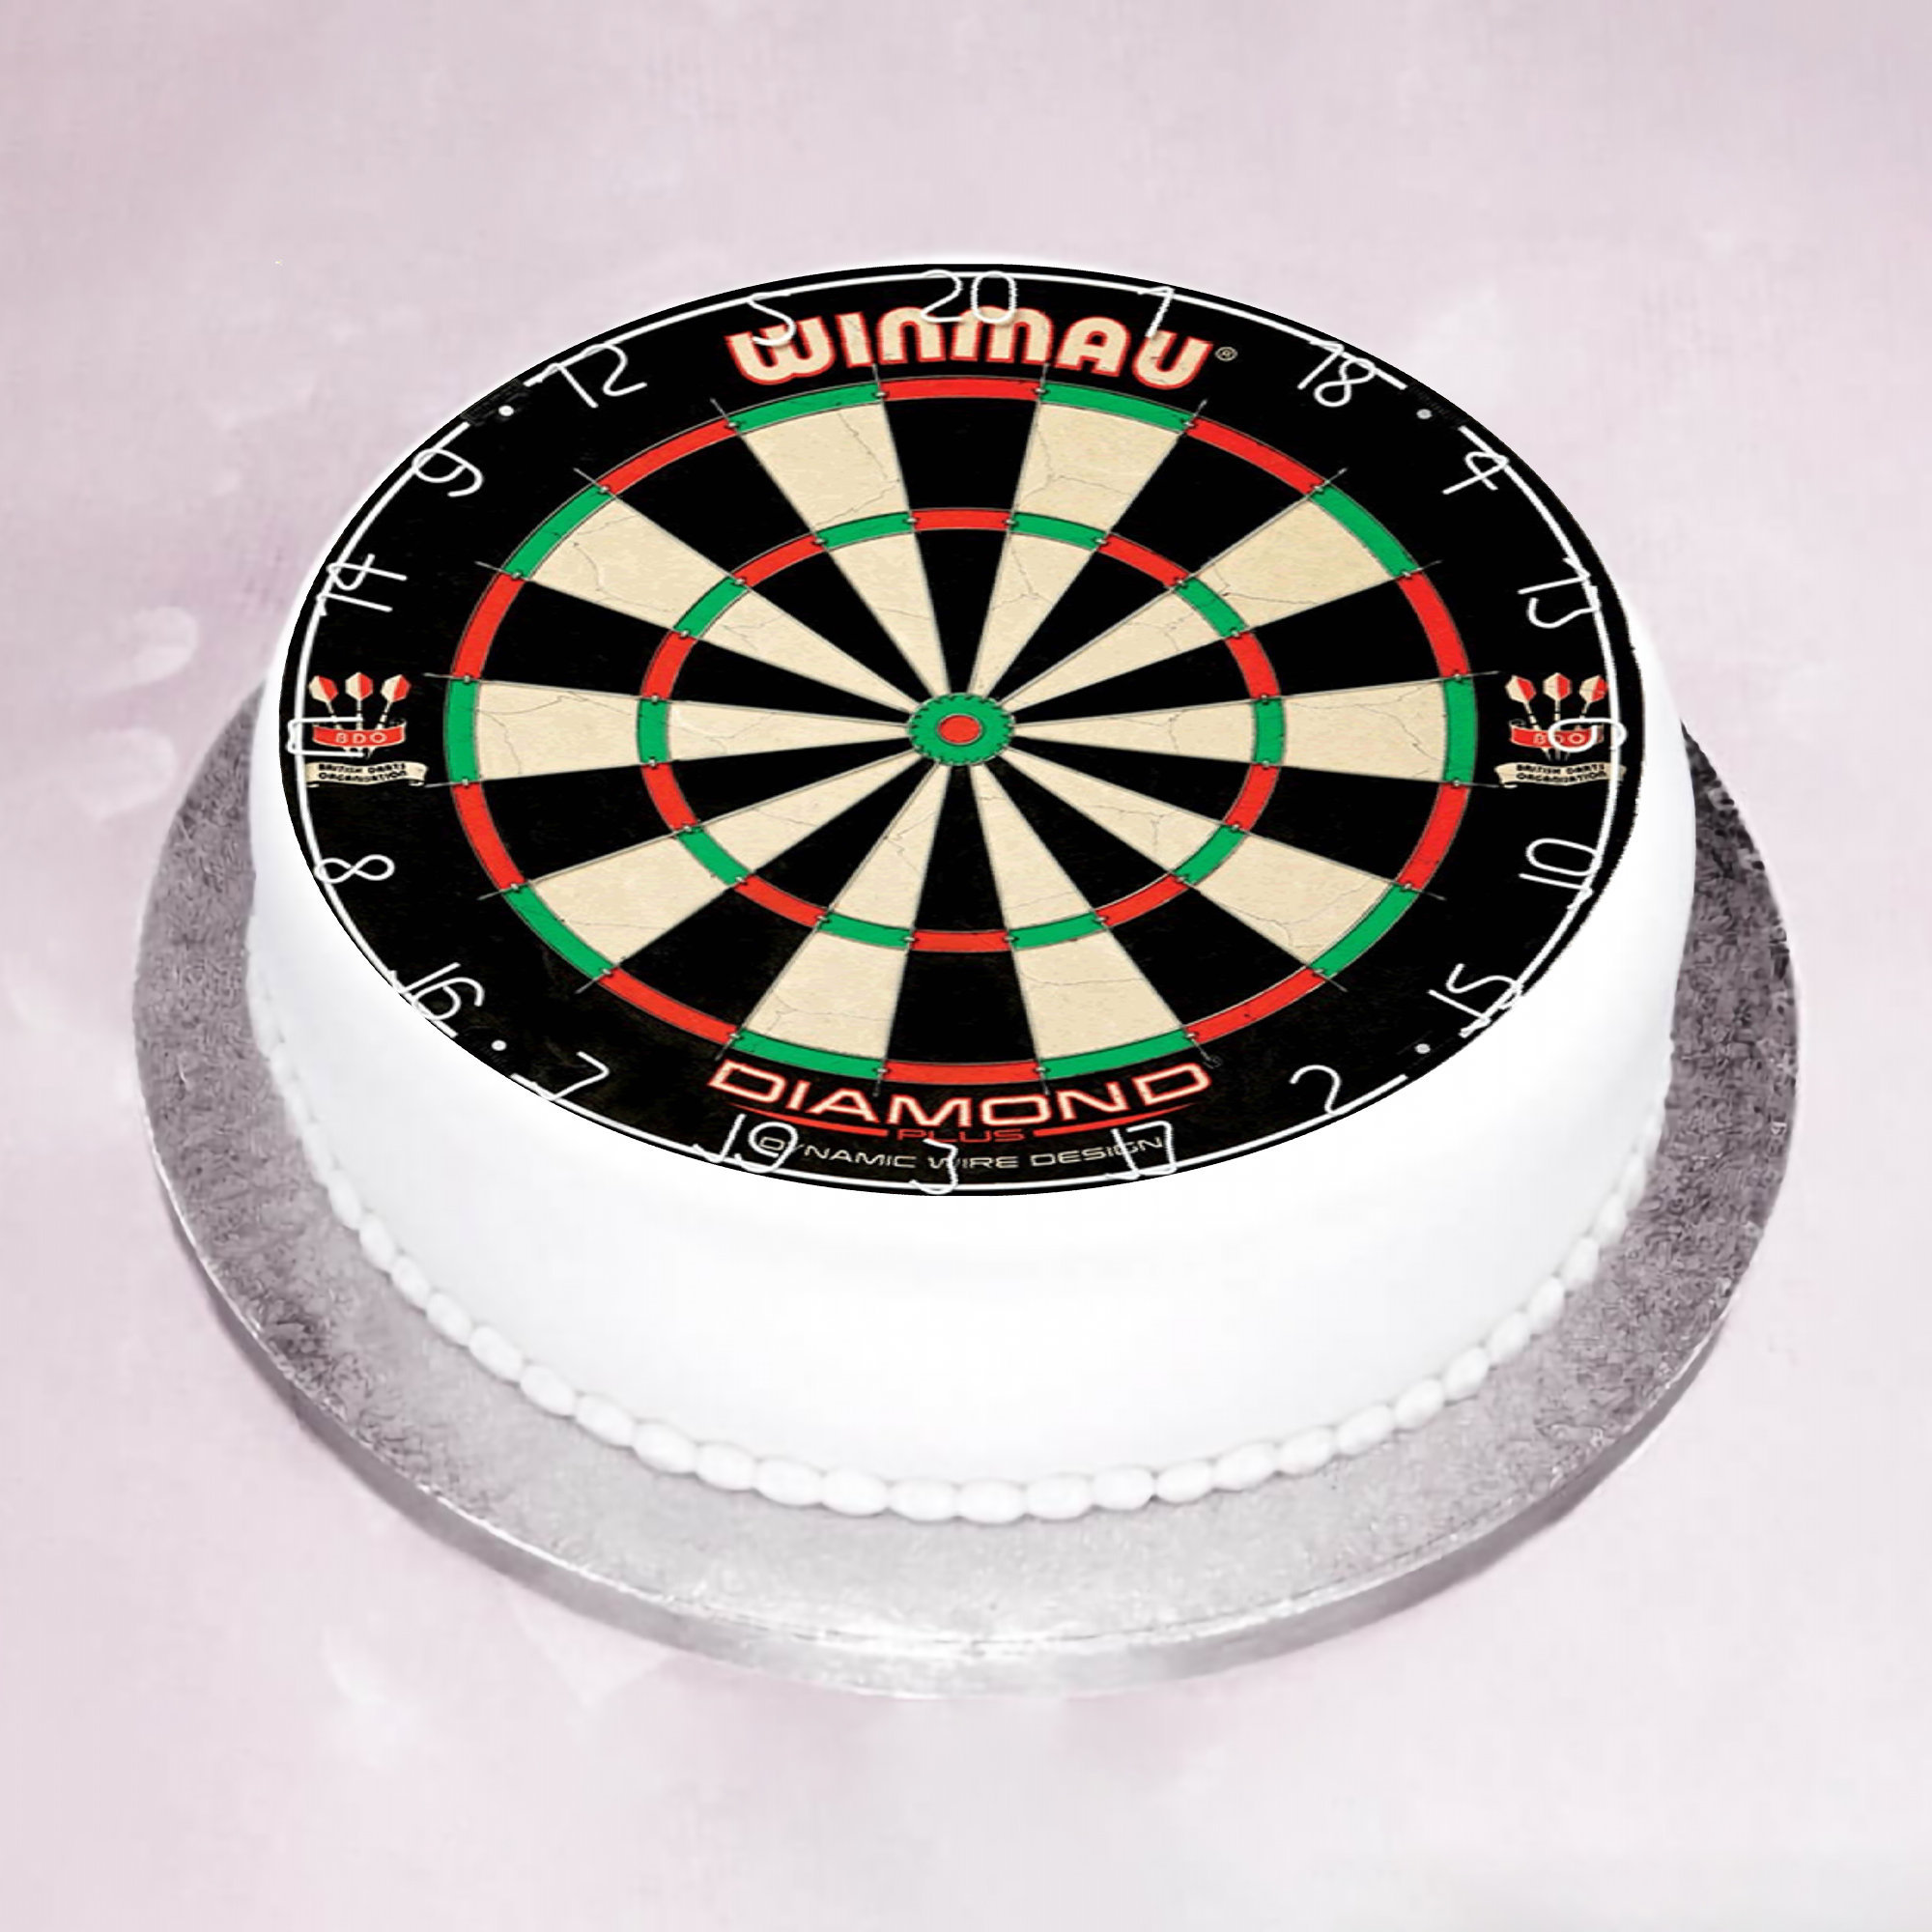 DARTBOARD GREAT FOR BIRTHDAY OR DARTS PARTY EDIBLE CUPCAKE TOPPER DECORATION 